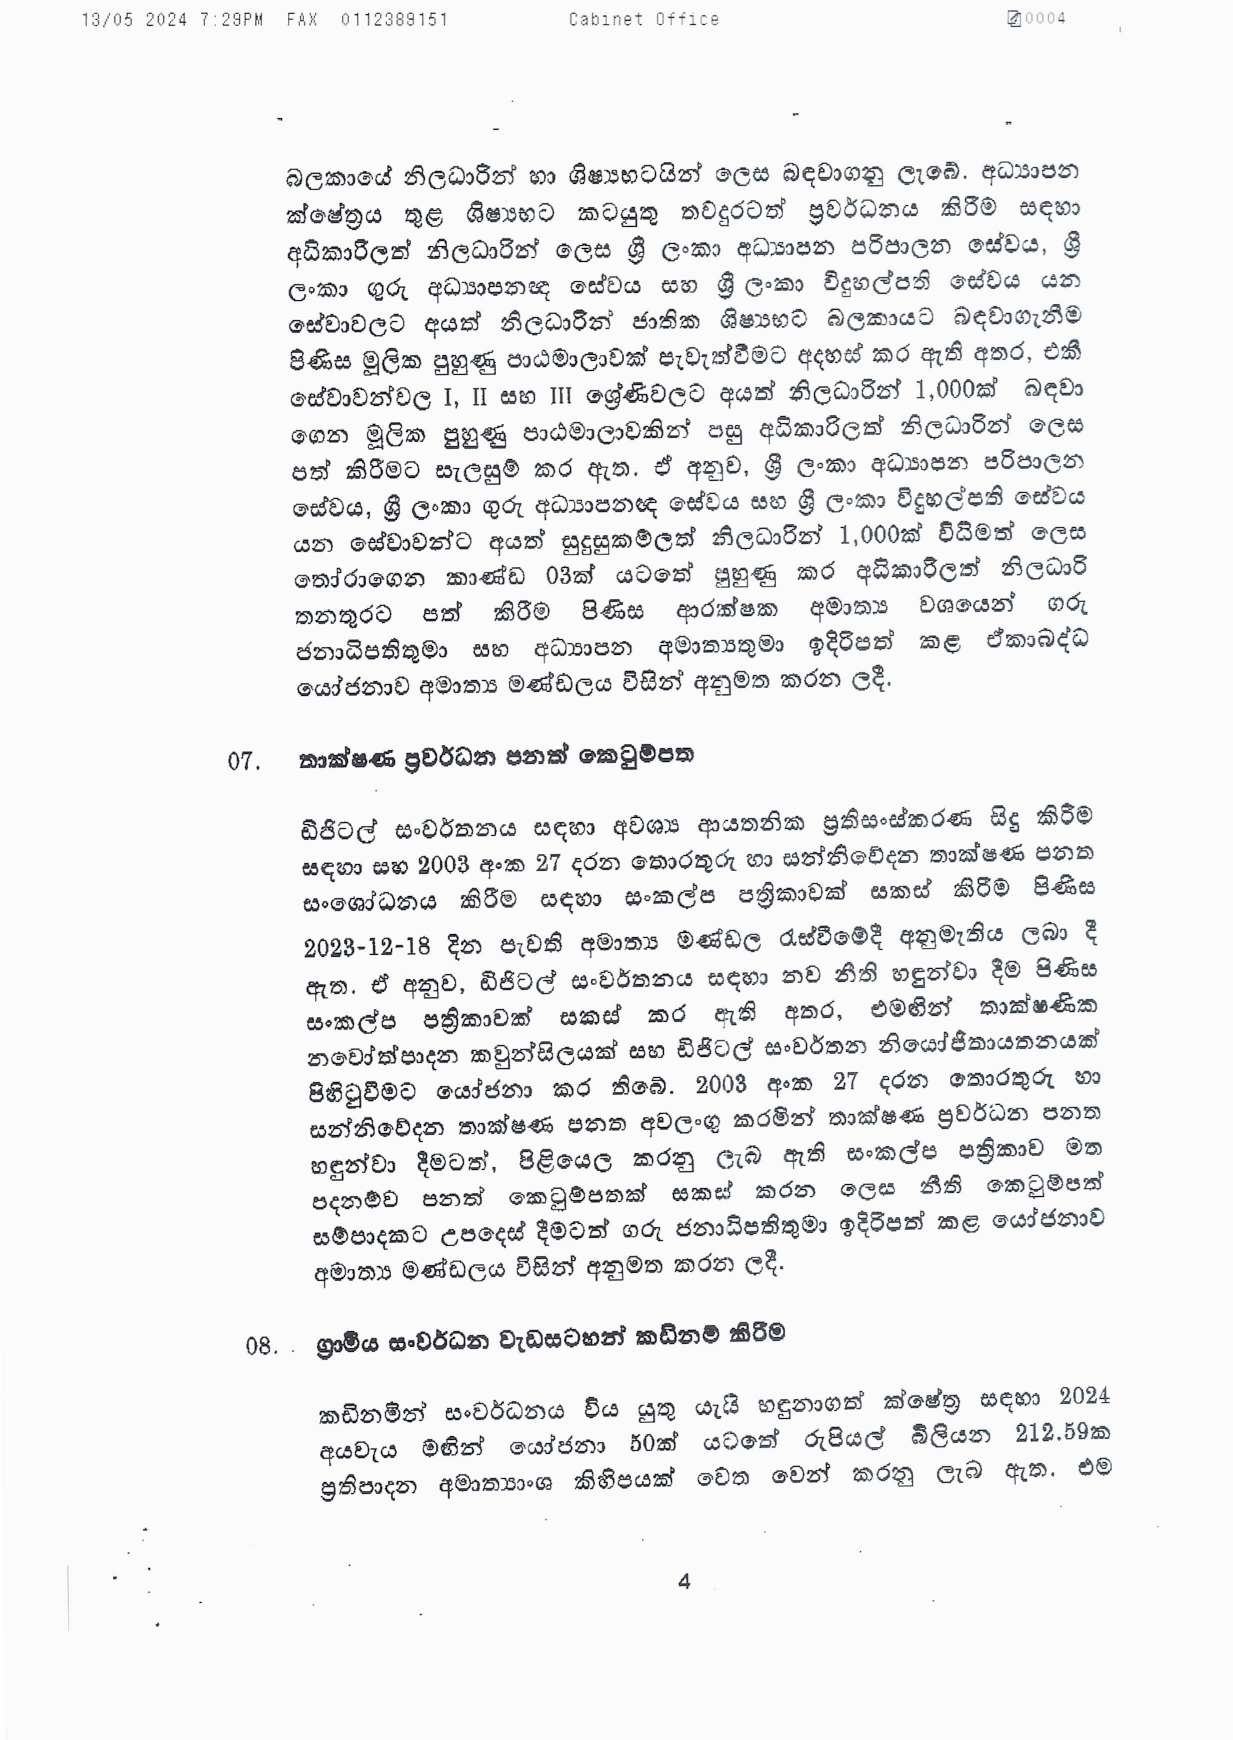 Cabinet Decisions on 13.05.2024 compressed page 00041